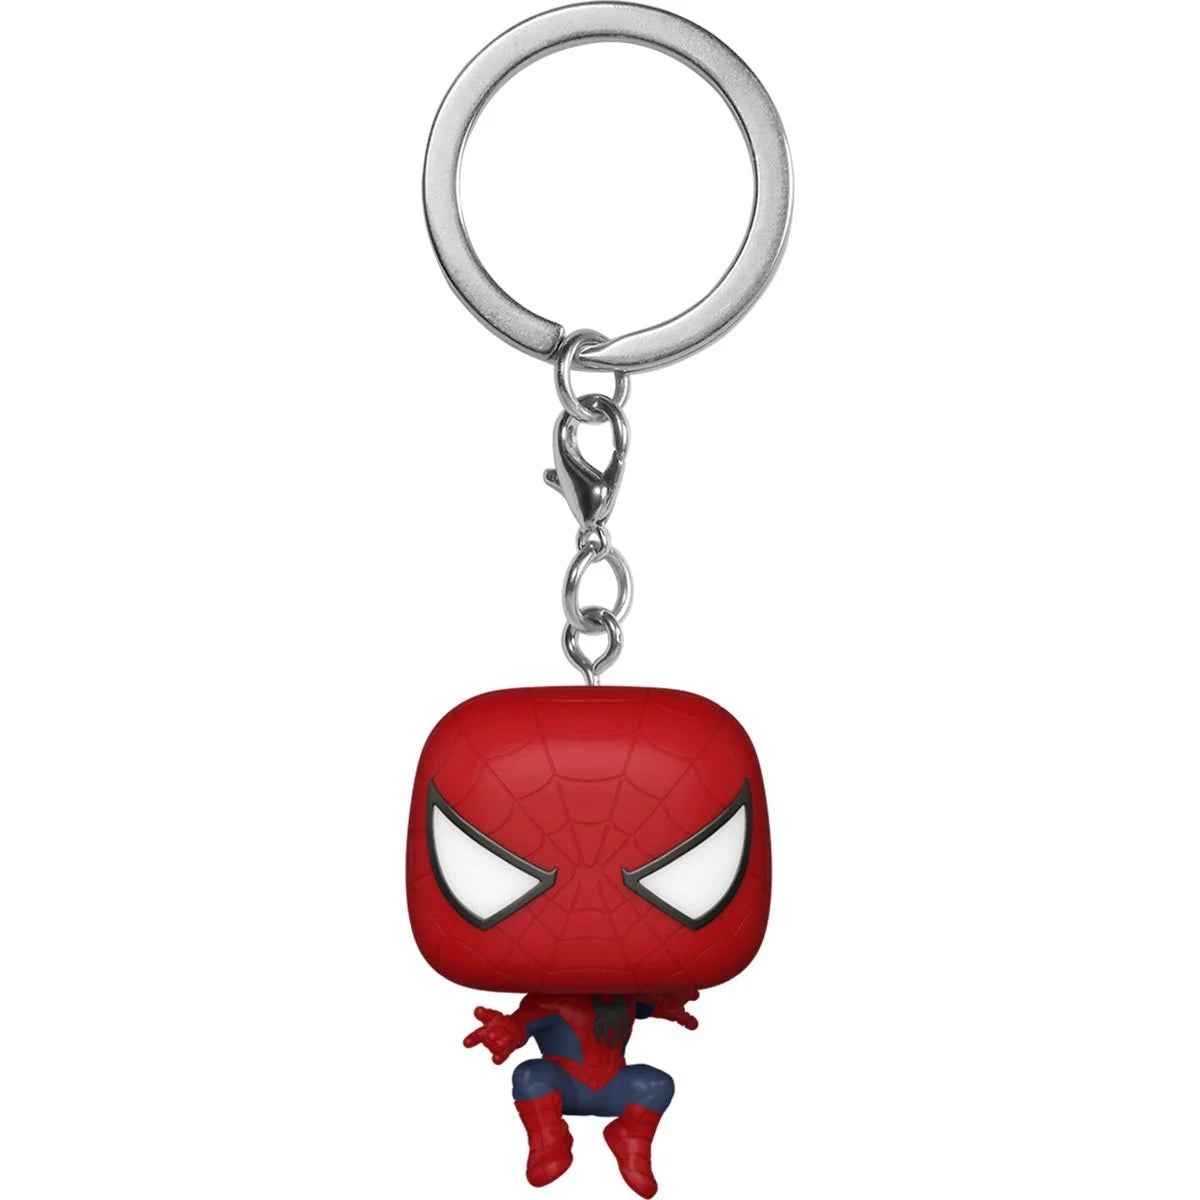 Spider-Man No Way Home Leaping Pocket Pop! Key Chain